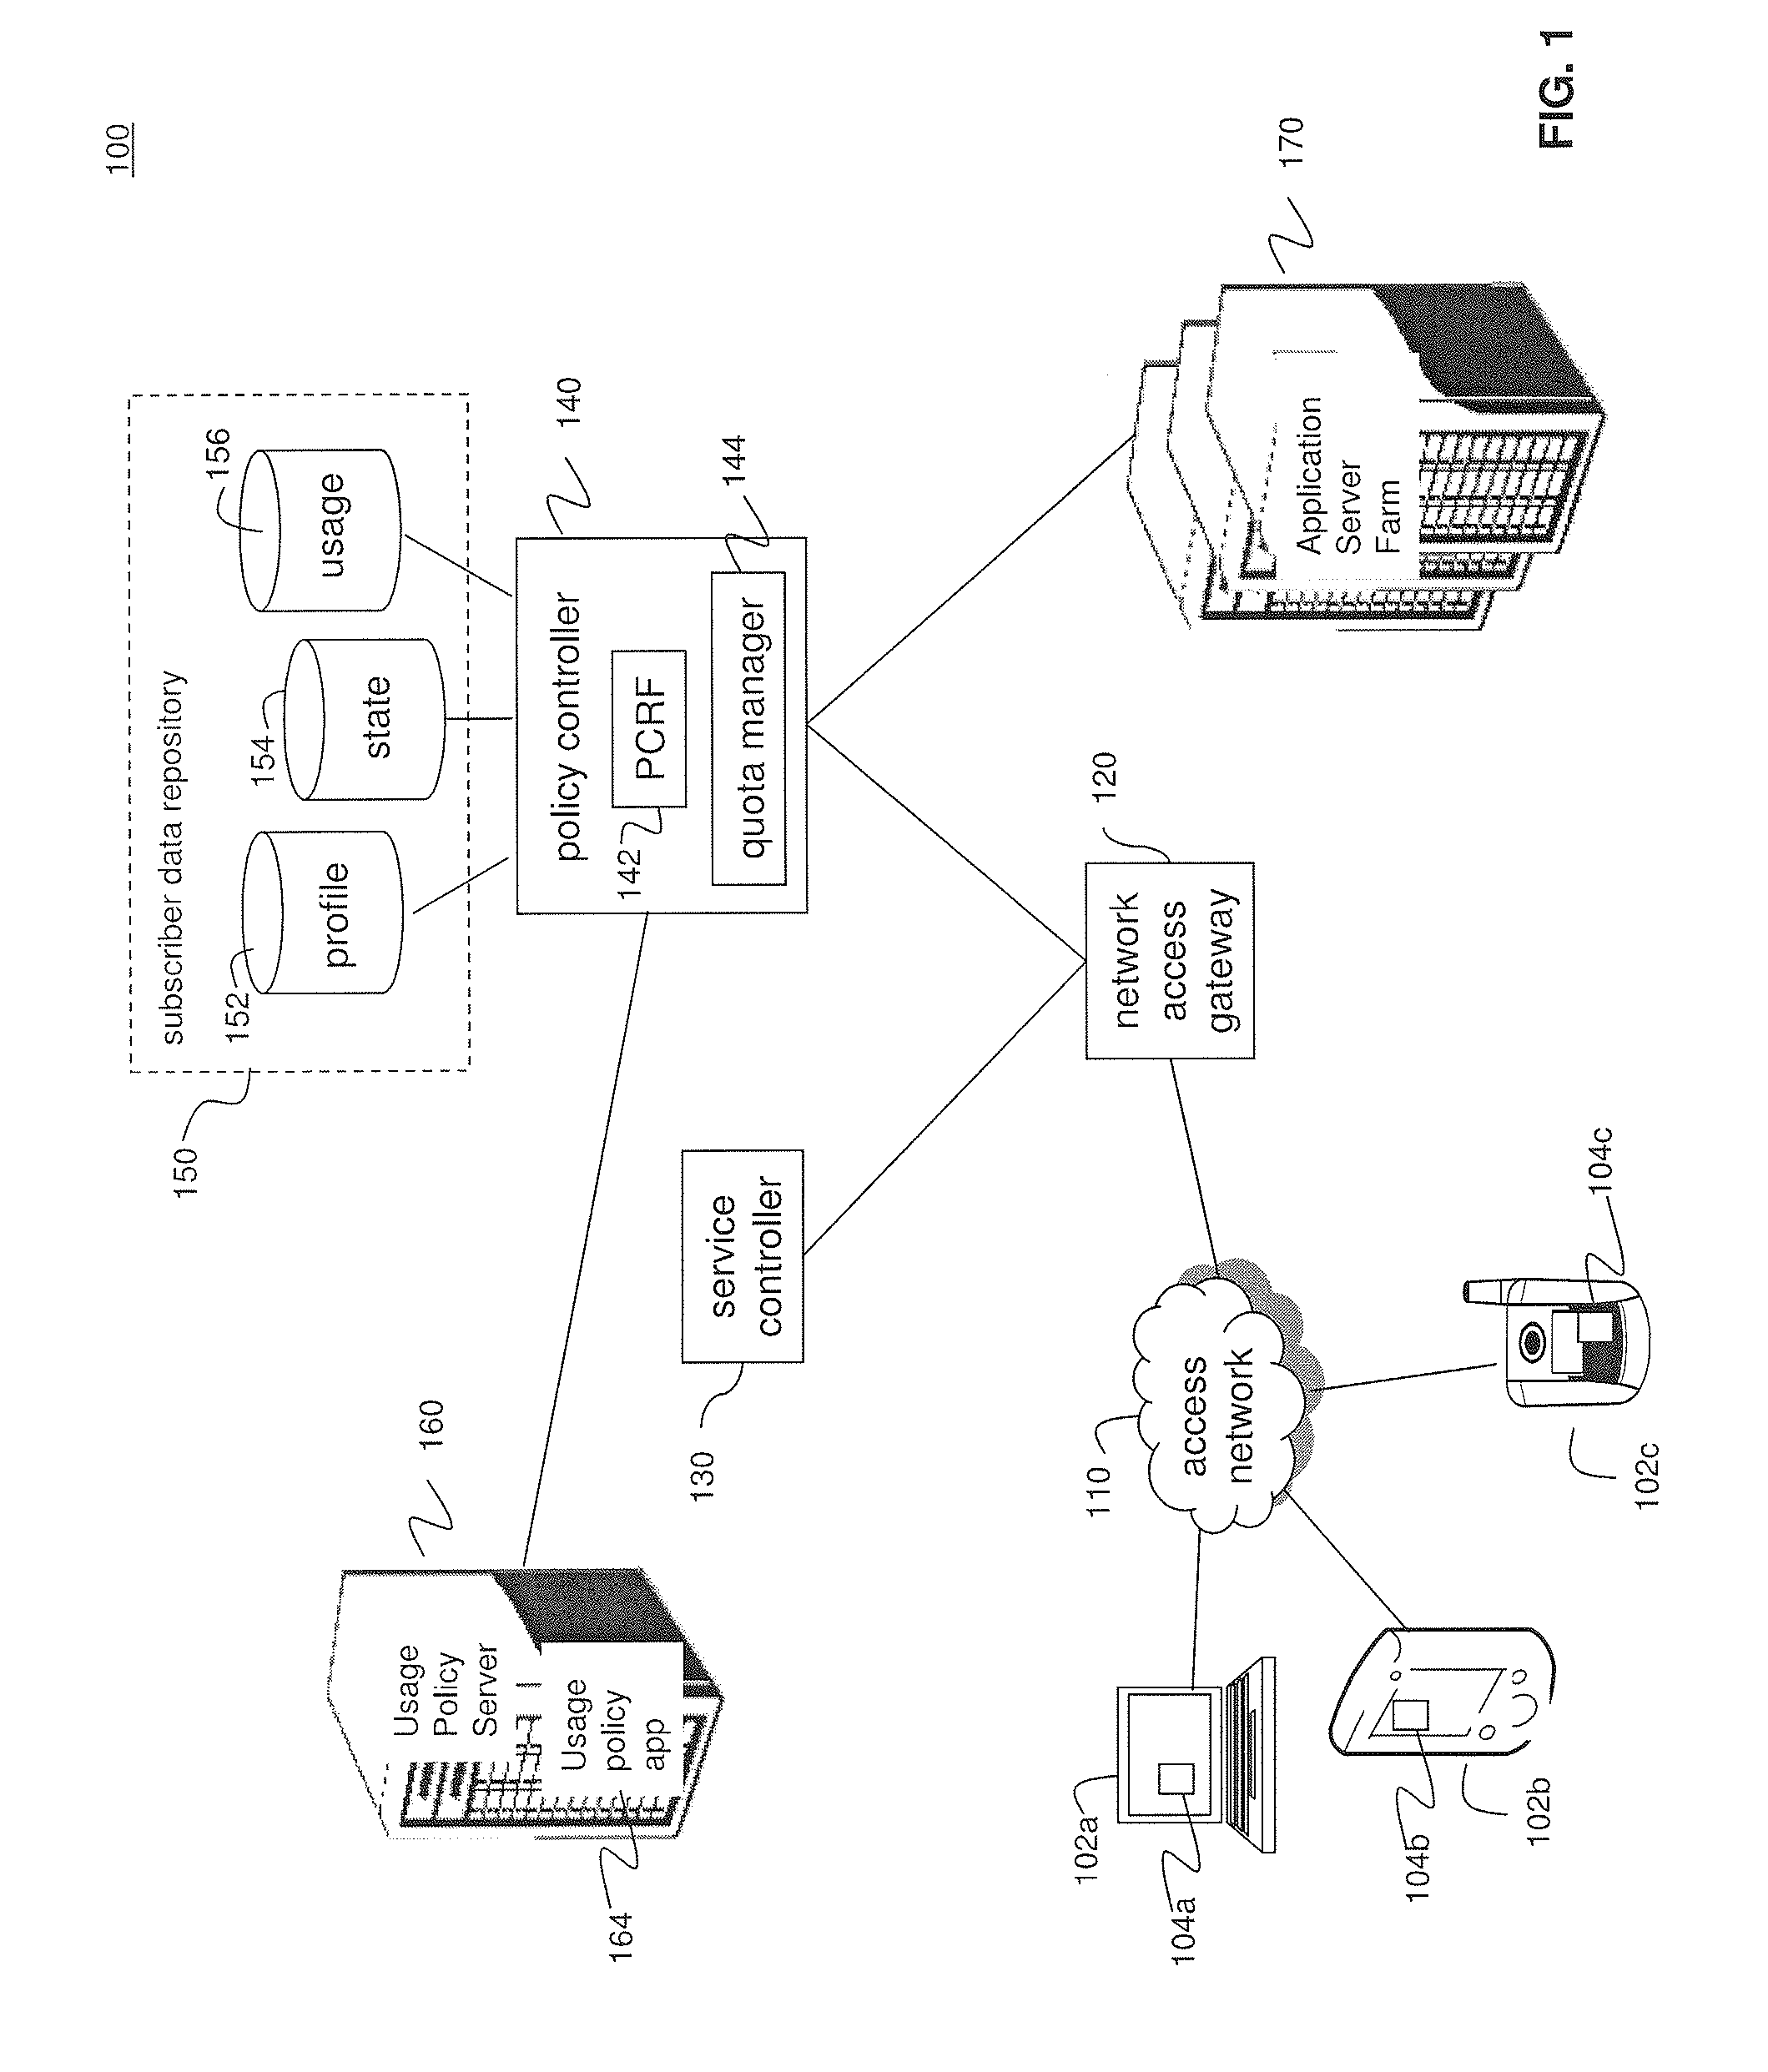 System and Methods for User-Centric Mobile Device-Based Data Communications Cost Monitoring and Control